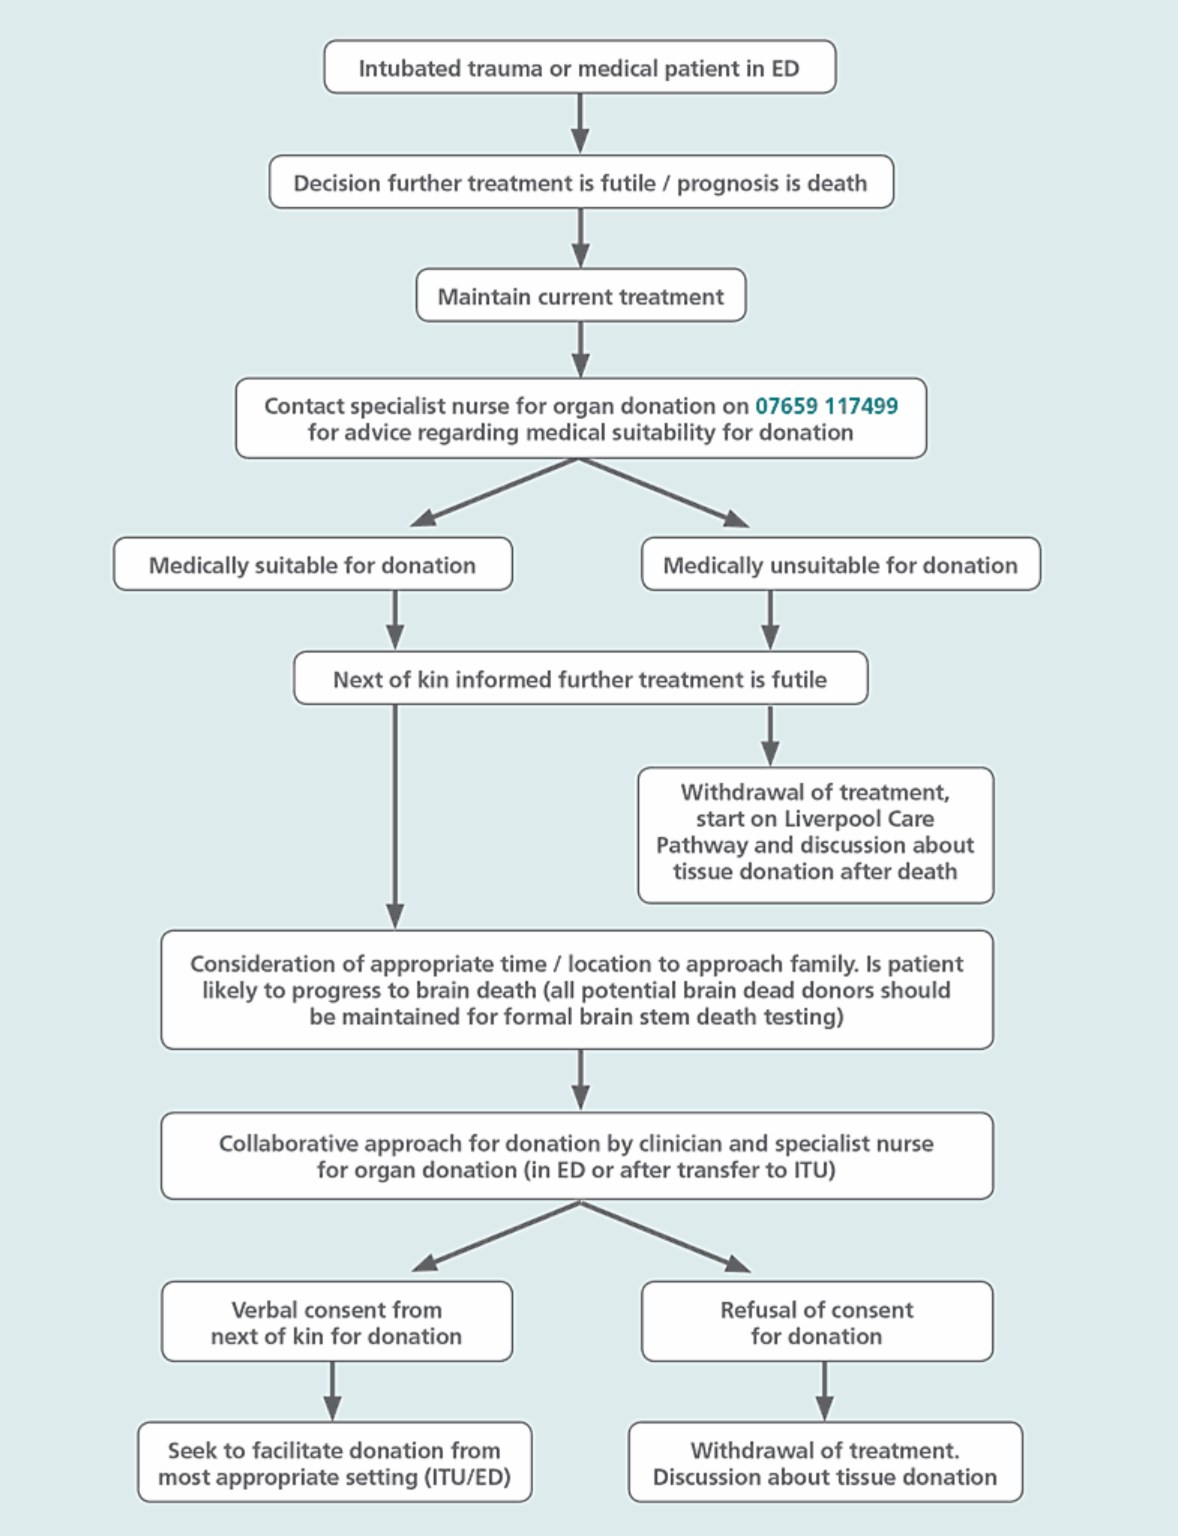 flow diagram of steps to identify eligibility and consent for organ donation